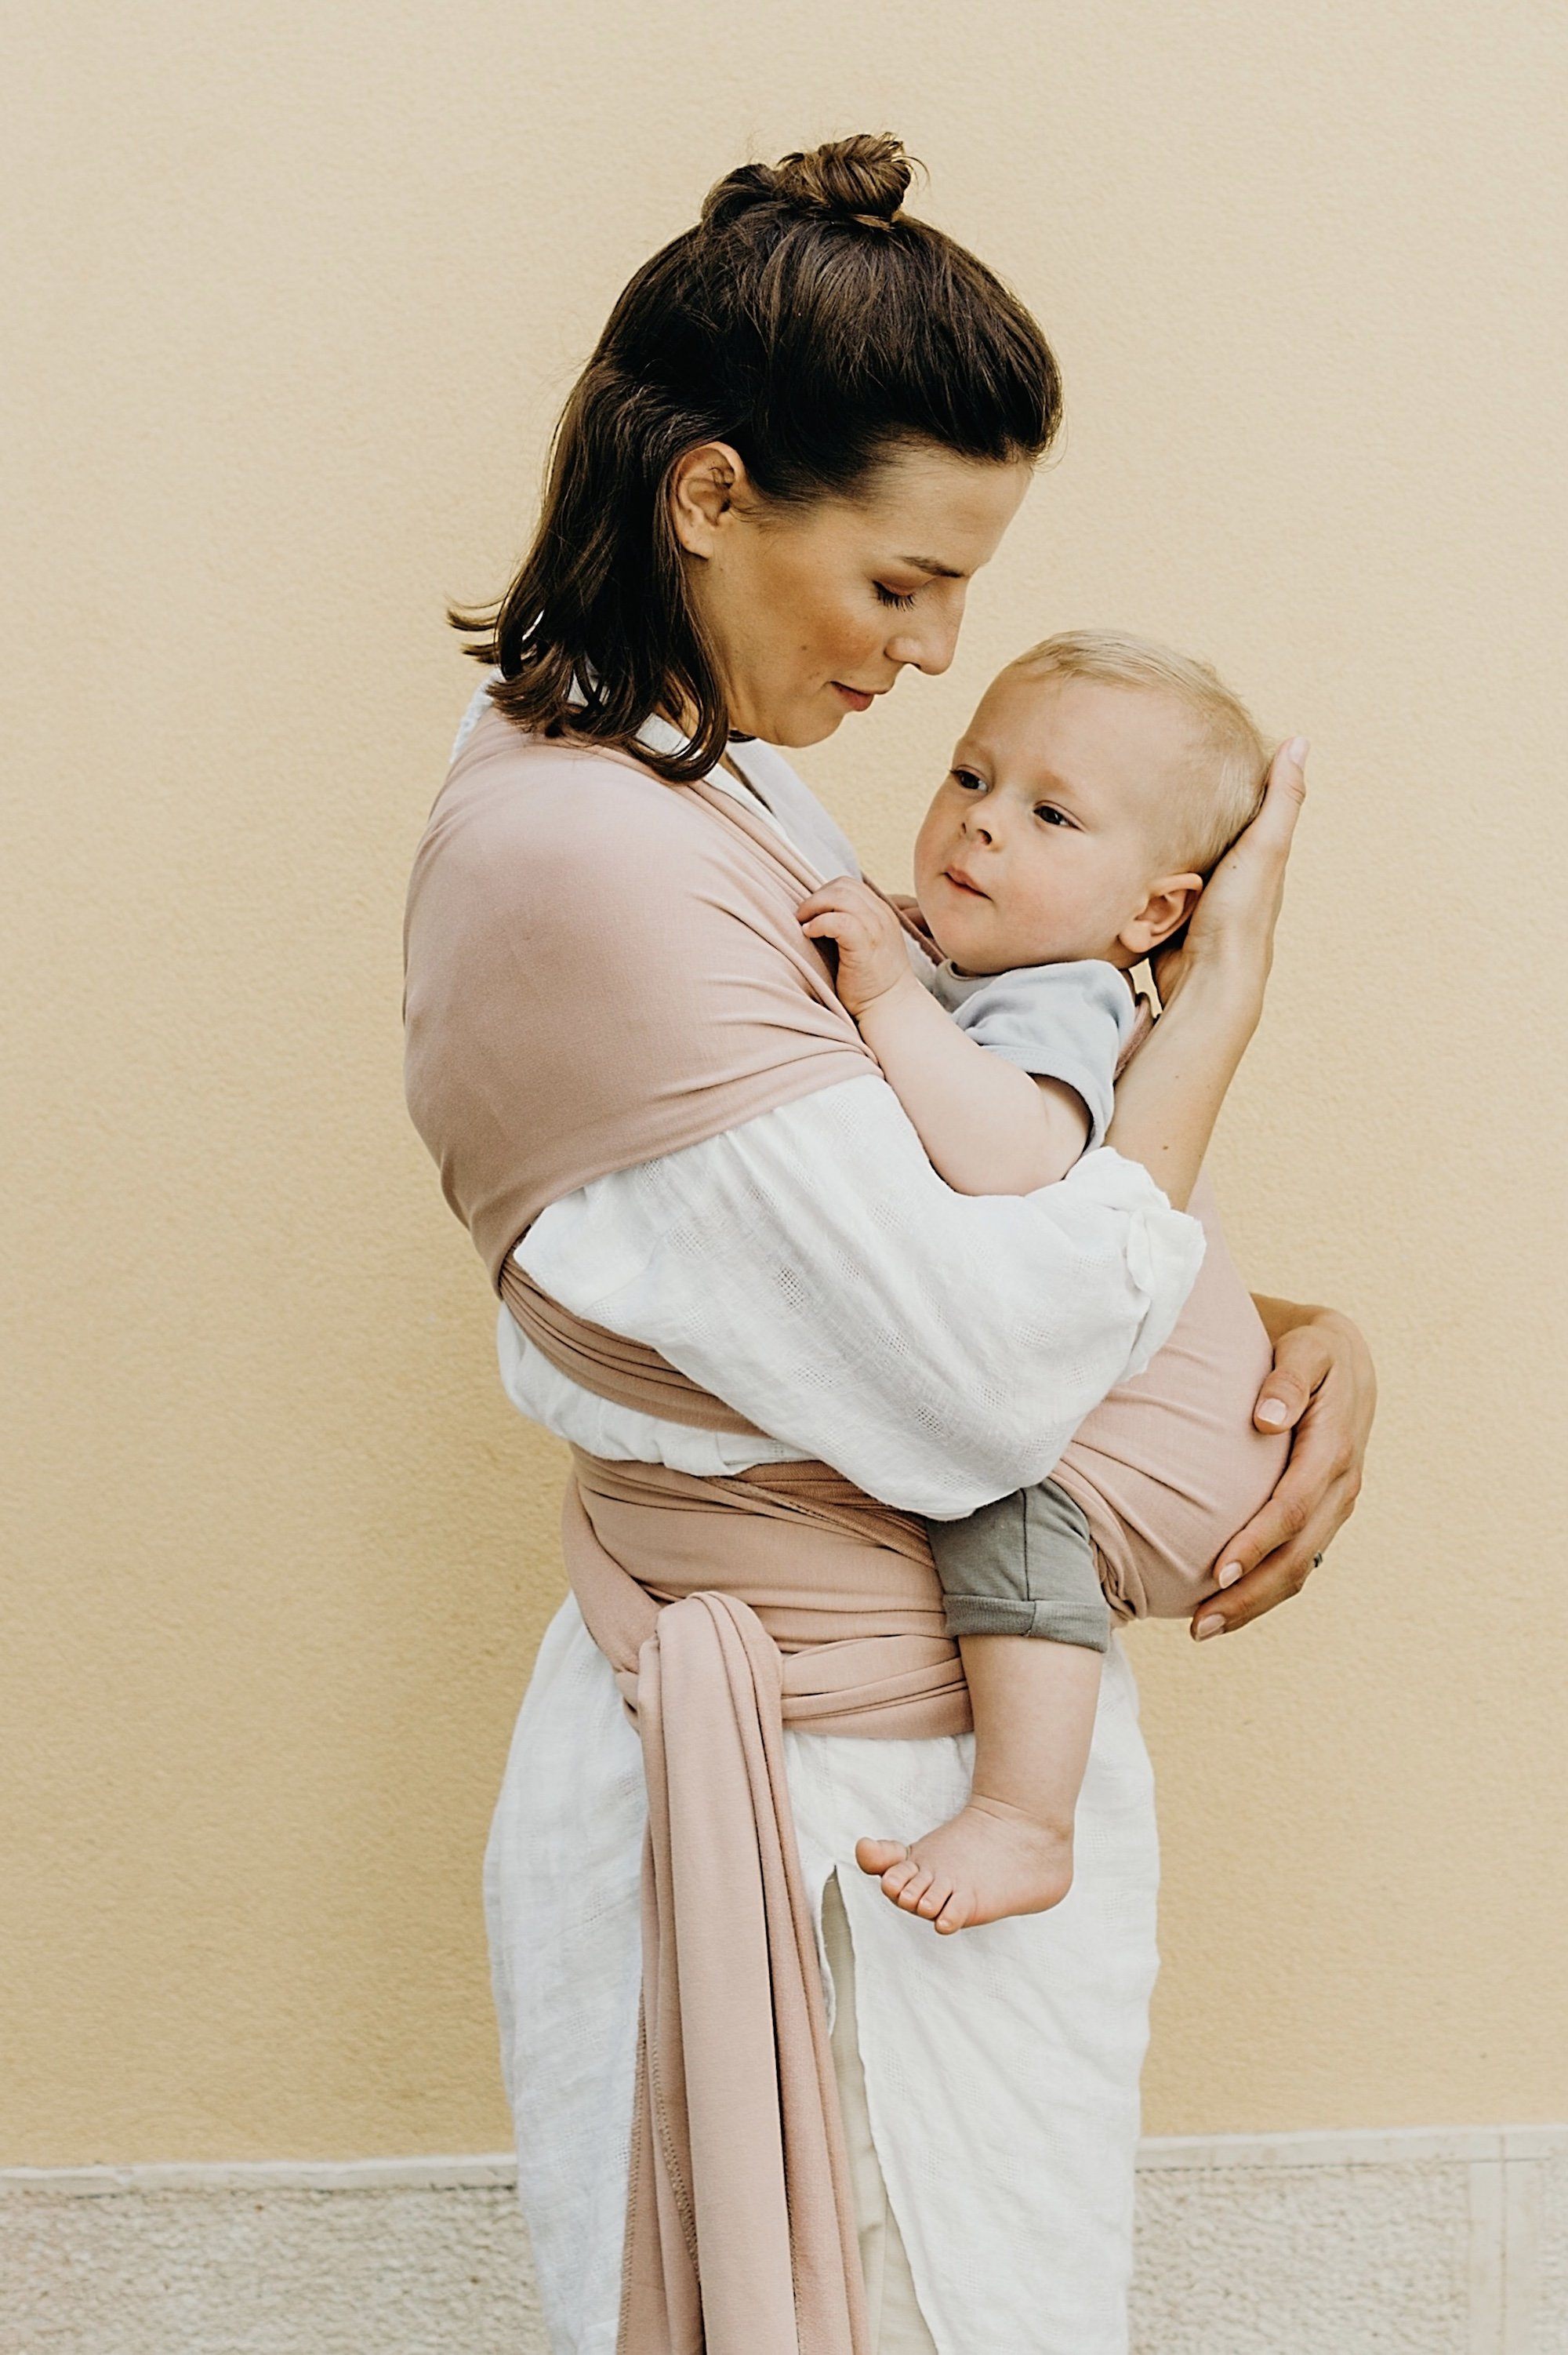 Cozy Comfort: Stretchy Baby Wraps for Bonding Bliss – Happy Baby